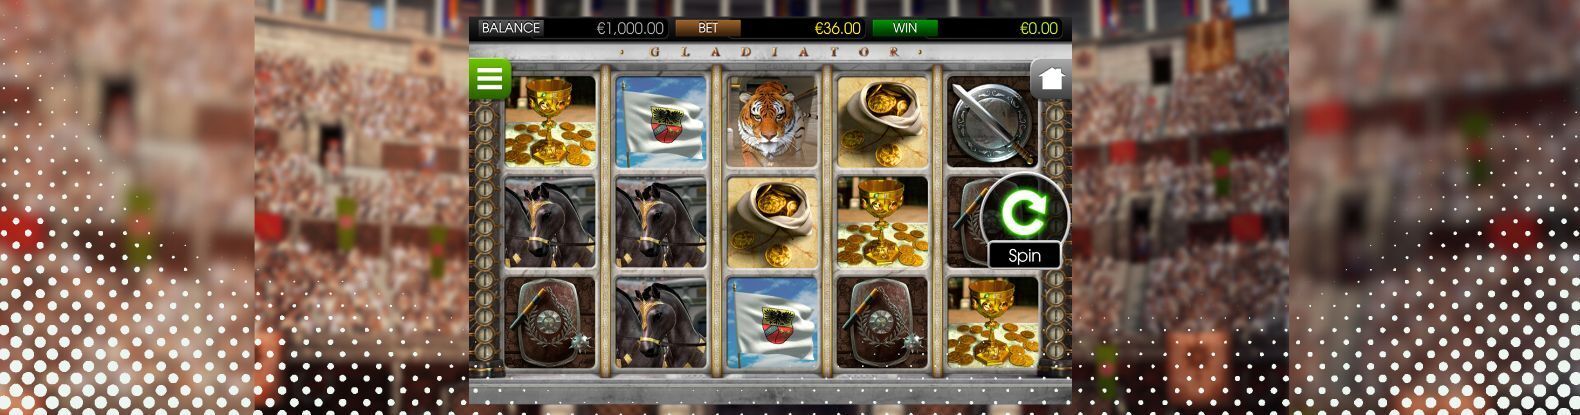 This is a pic of Gladiator pokies game by Betsoft